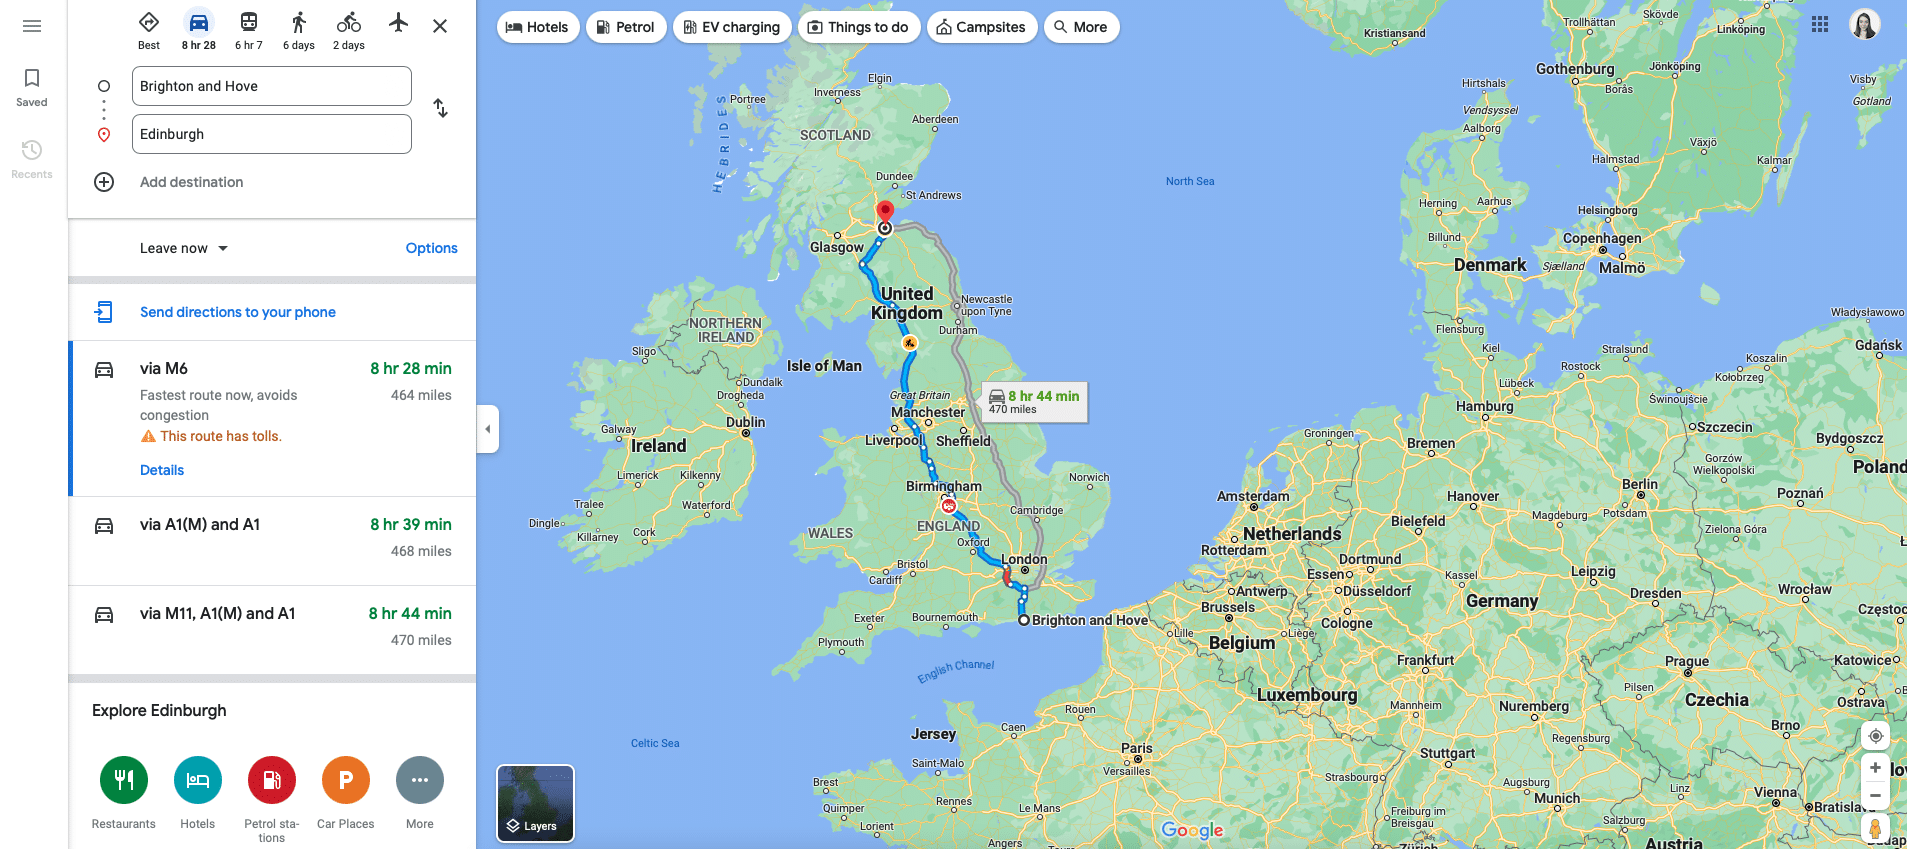 Screenshot of Google Maps showing driving route options from Brighton to Edinburgh